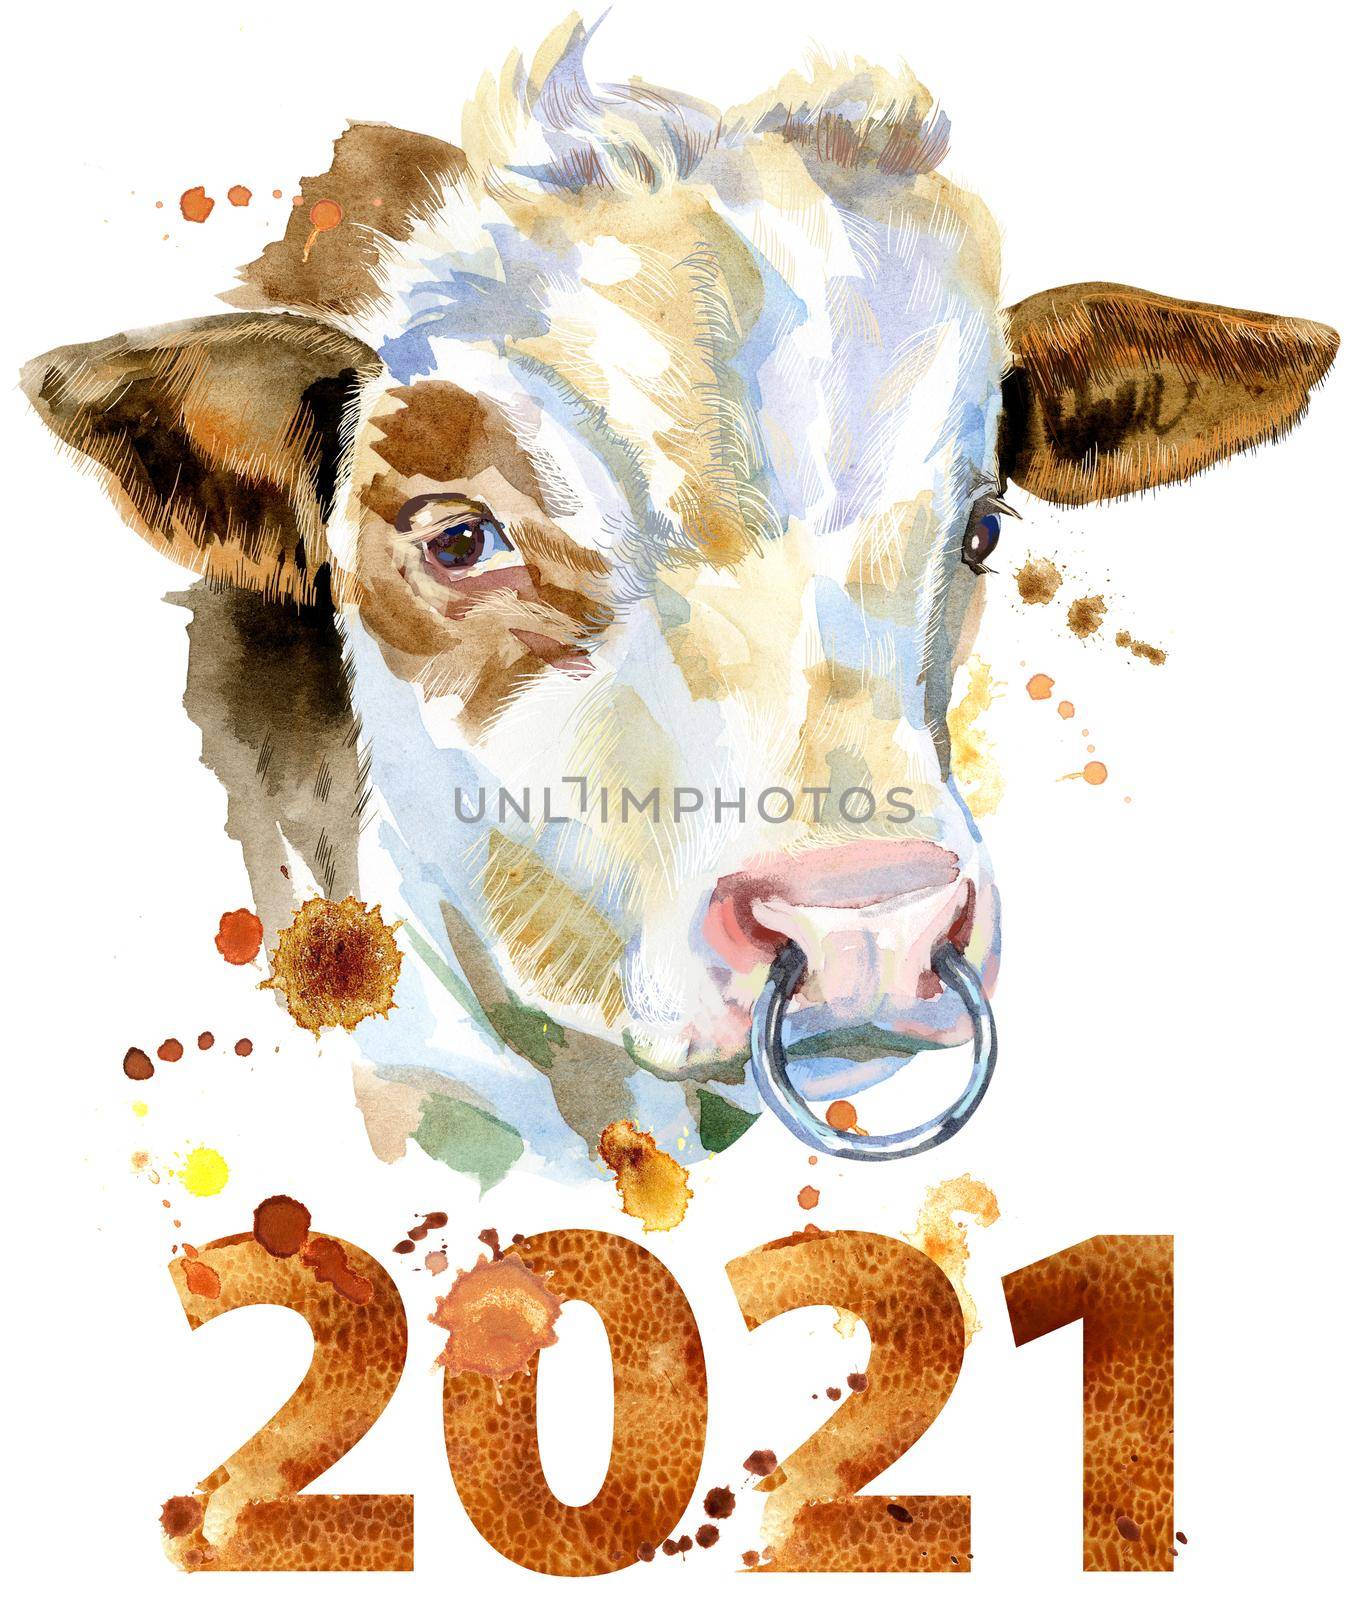 Bull with number 2021 watercolor graphics. Bull animal illustration with splash watercolor textured background.